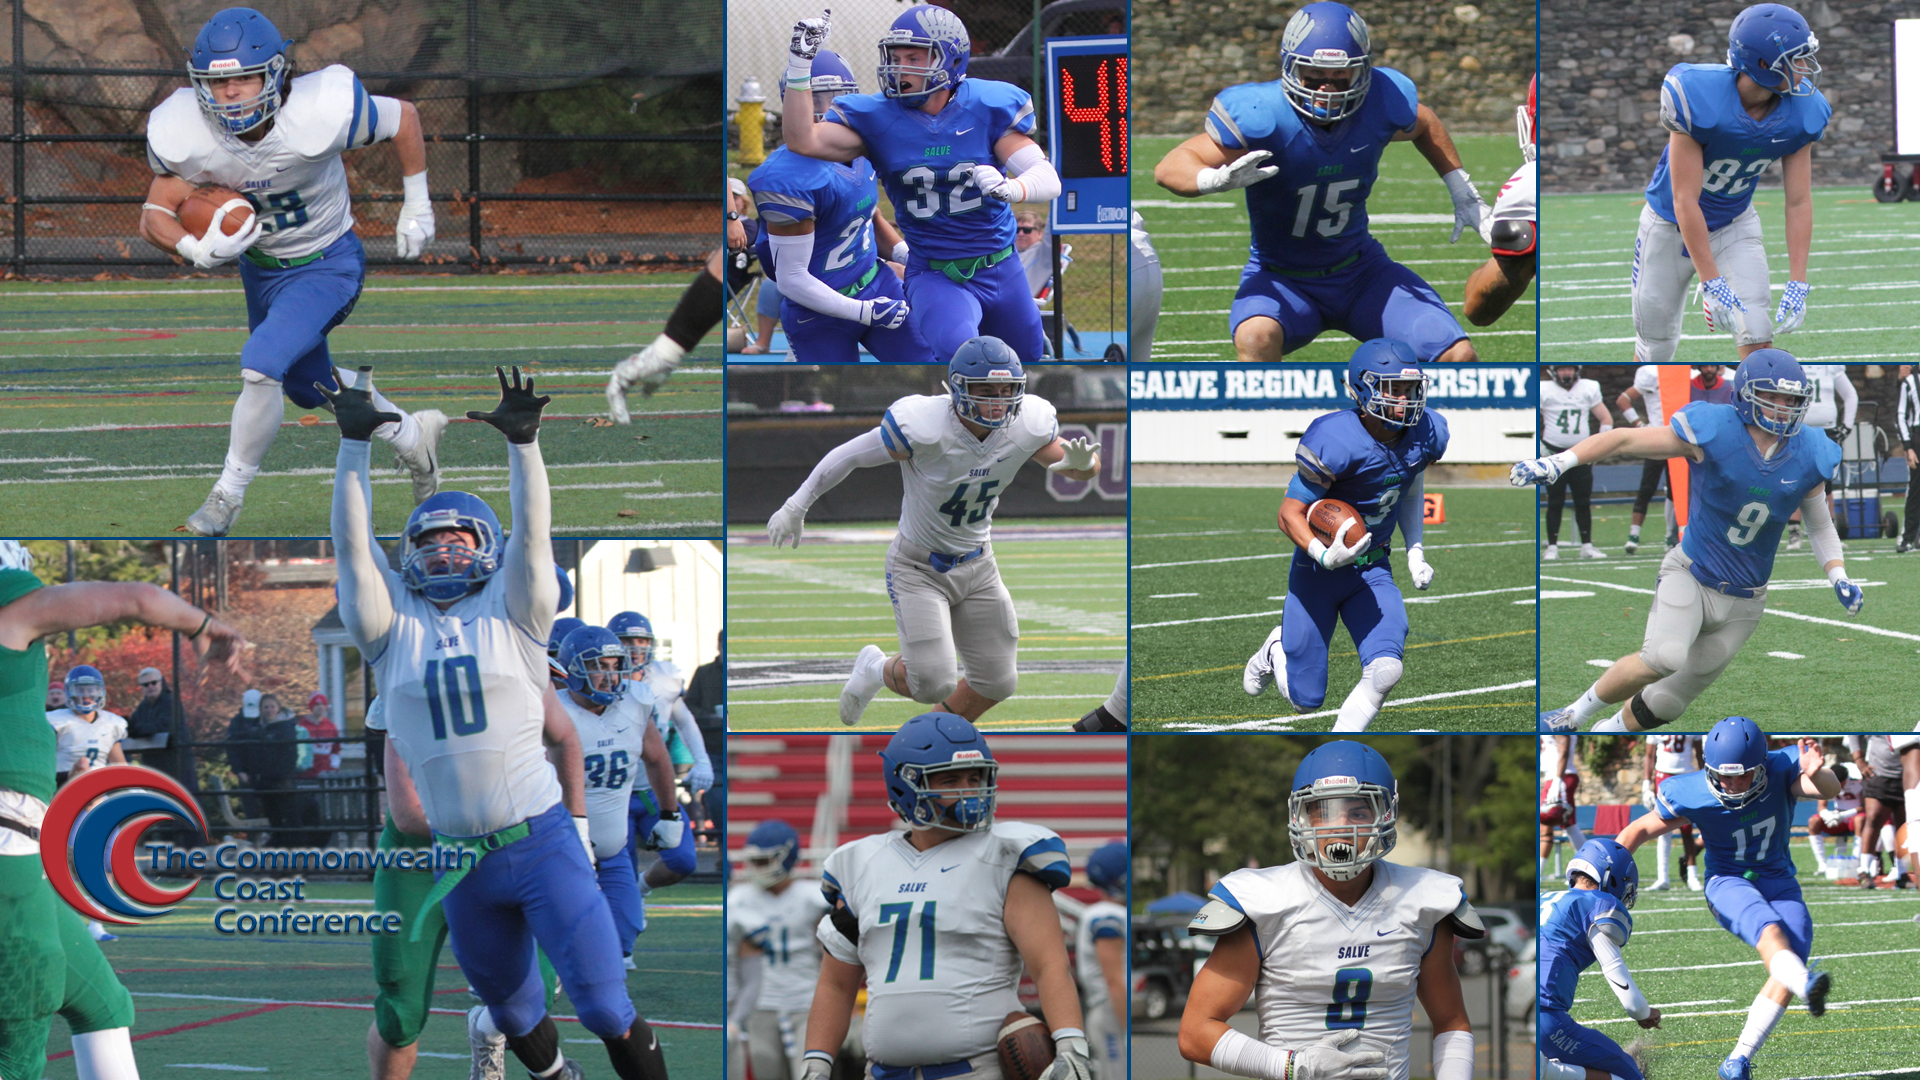 Eleven total Seahawks made the All-CCC Football squad.